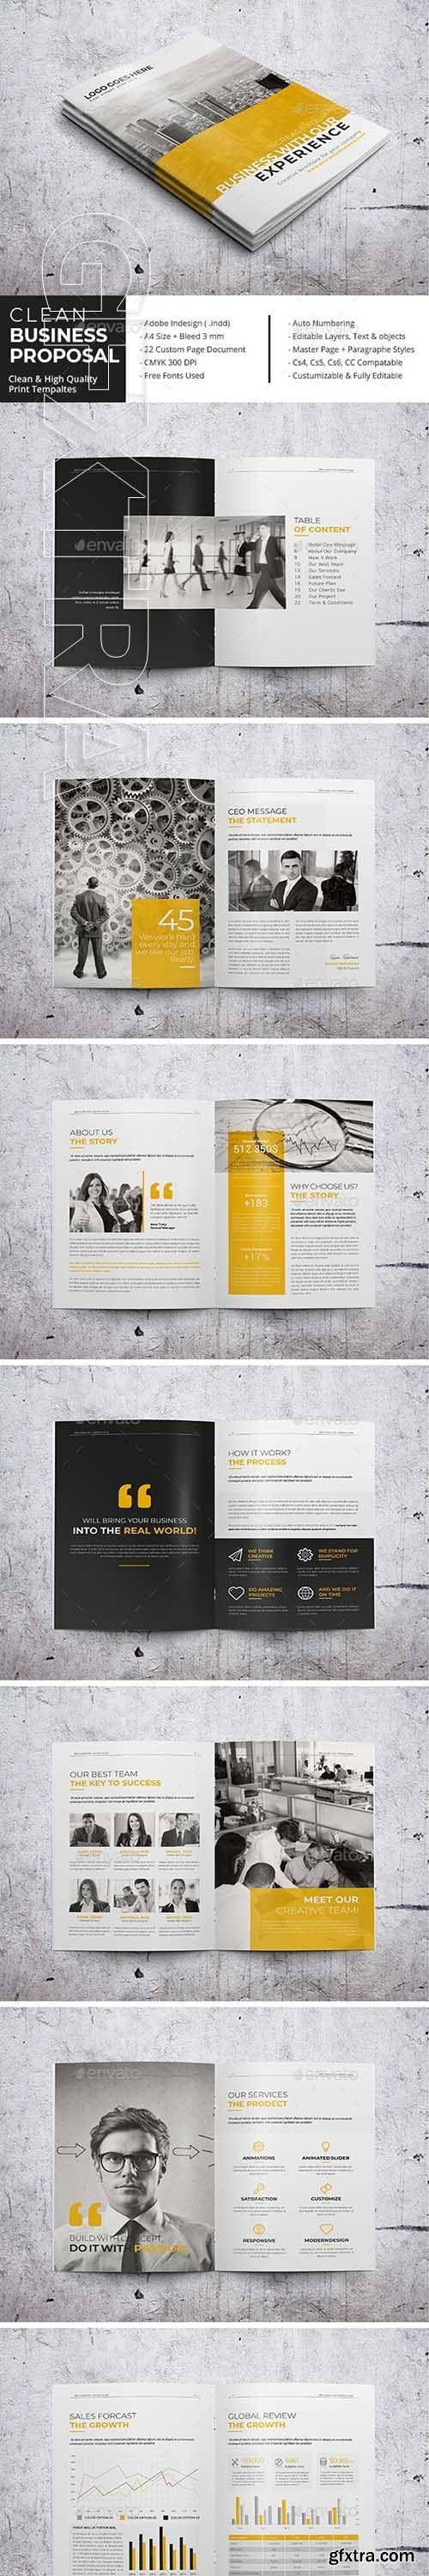 Graphicriver - Clean Business Proposal 21280656